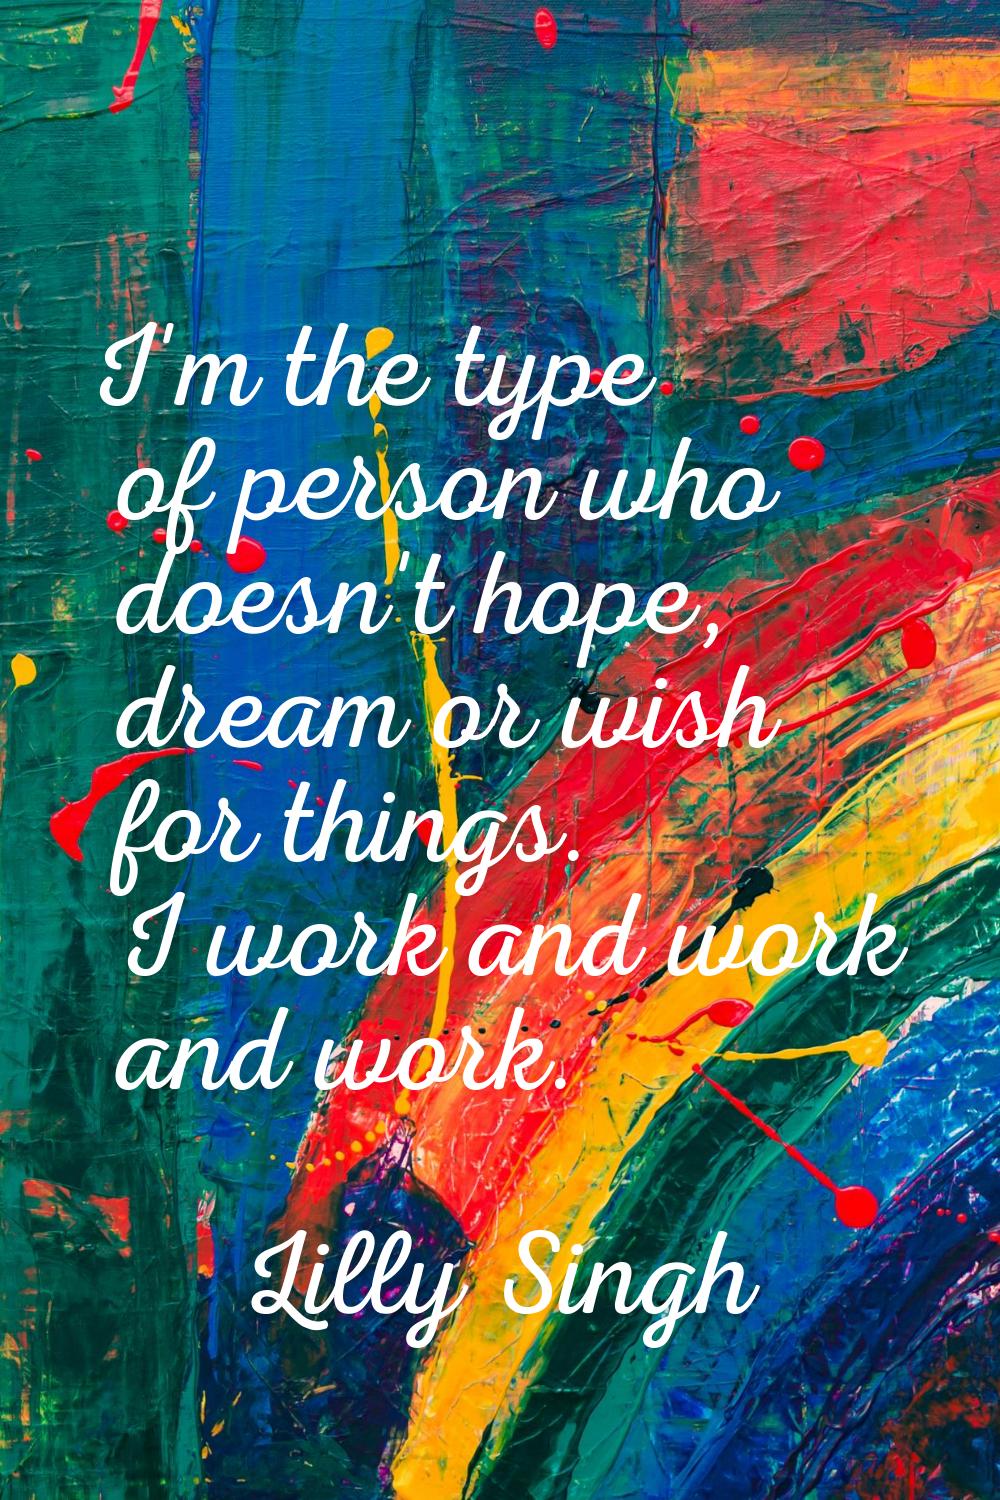 I'm the type of person who doesn't hope, dream or wish for things. I work and work and work.